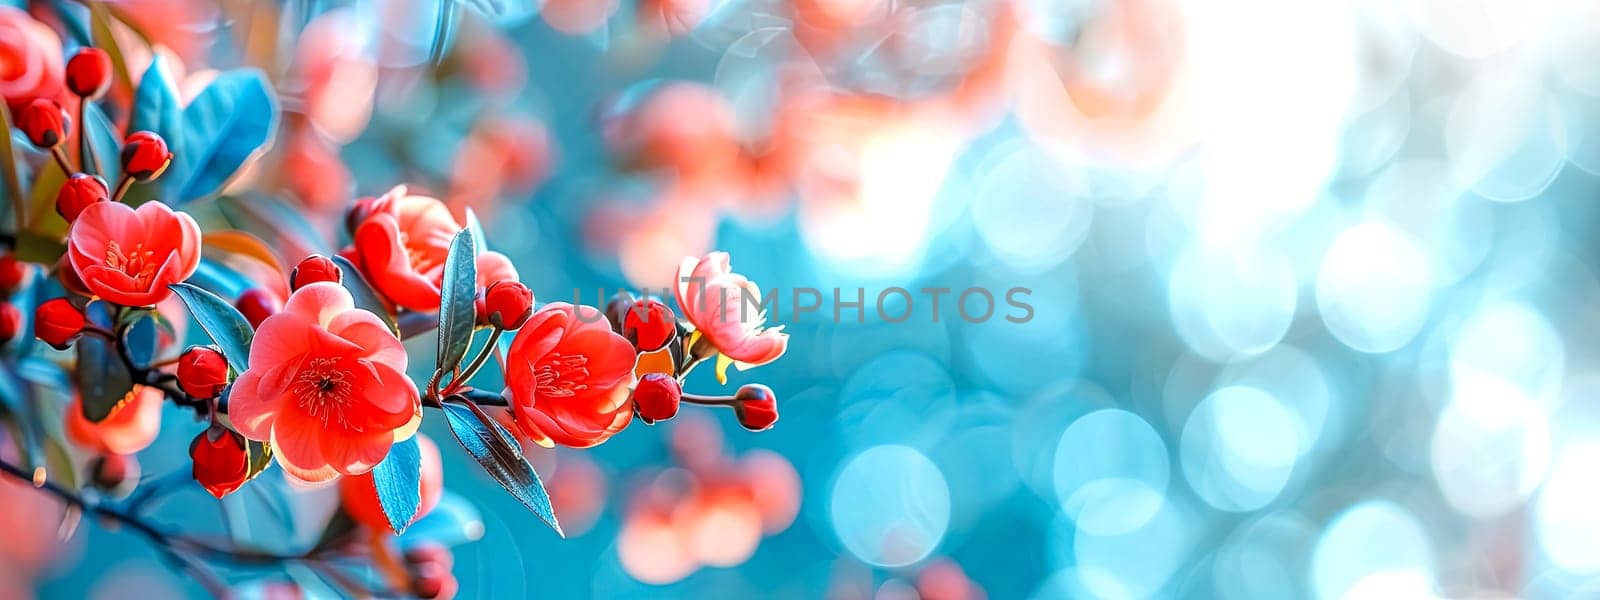 A vibrant flowering plant with red flowers and berries, set against an electric blue sky. The colorful petals create a beautiful pattern in this macro photography, complemented by fluffy clouds.